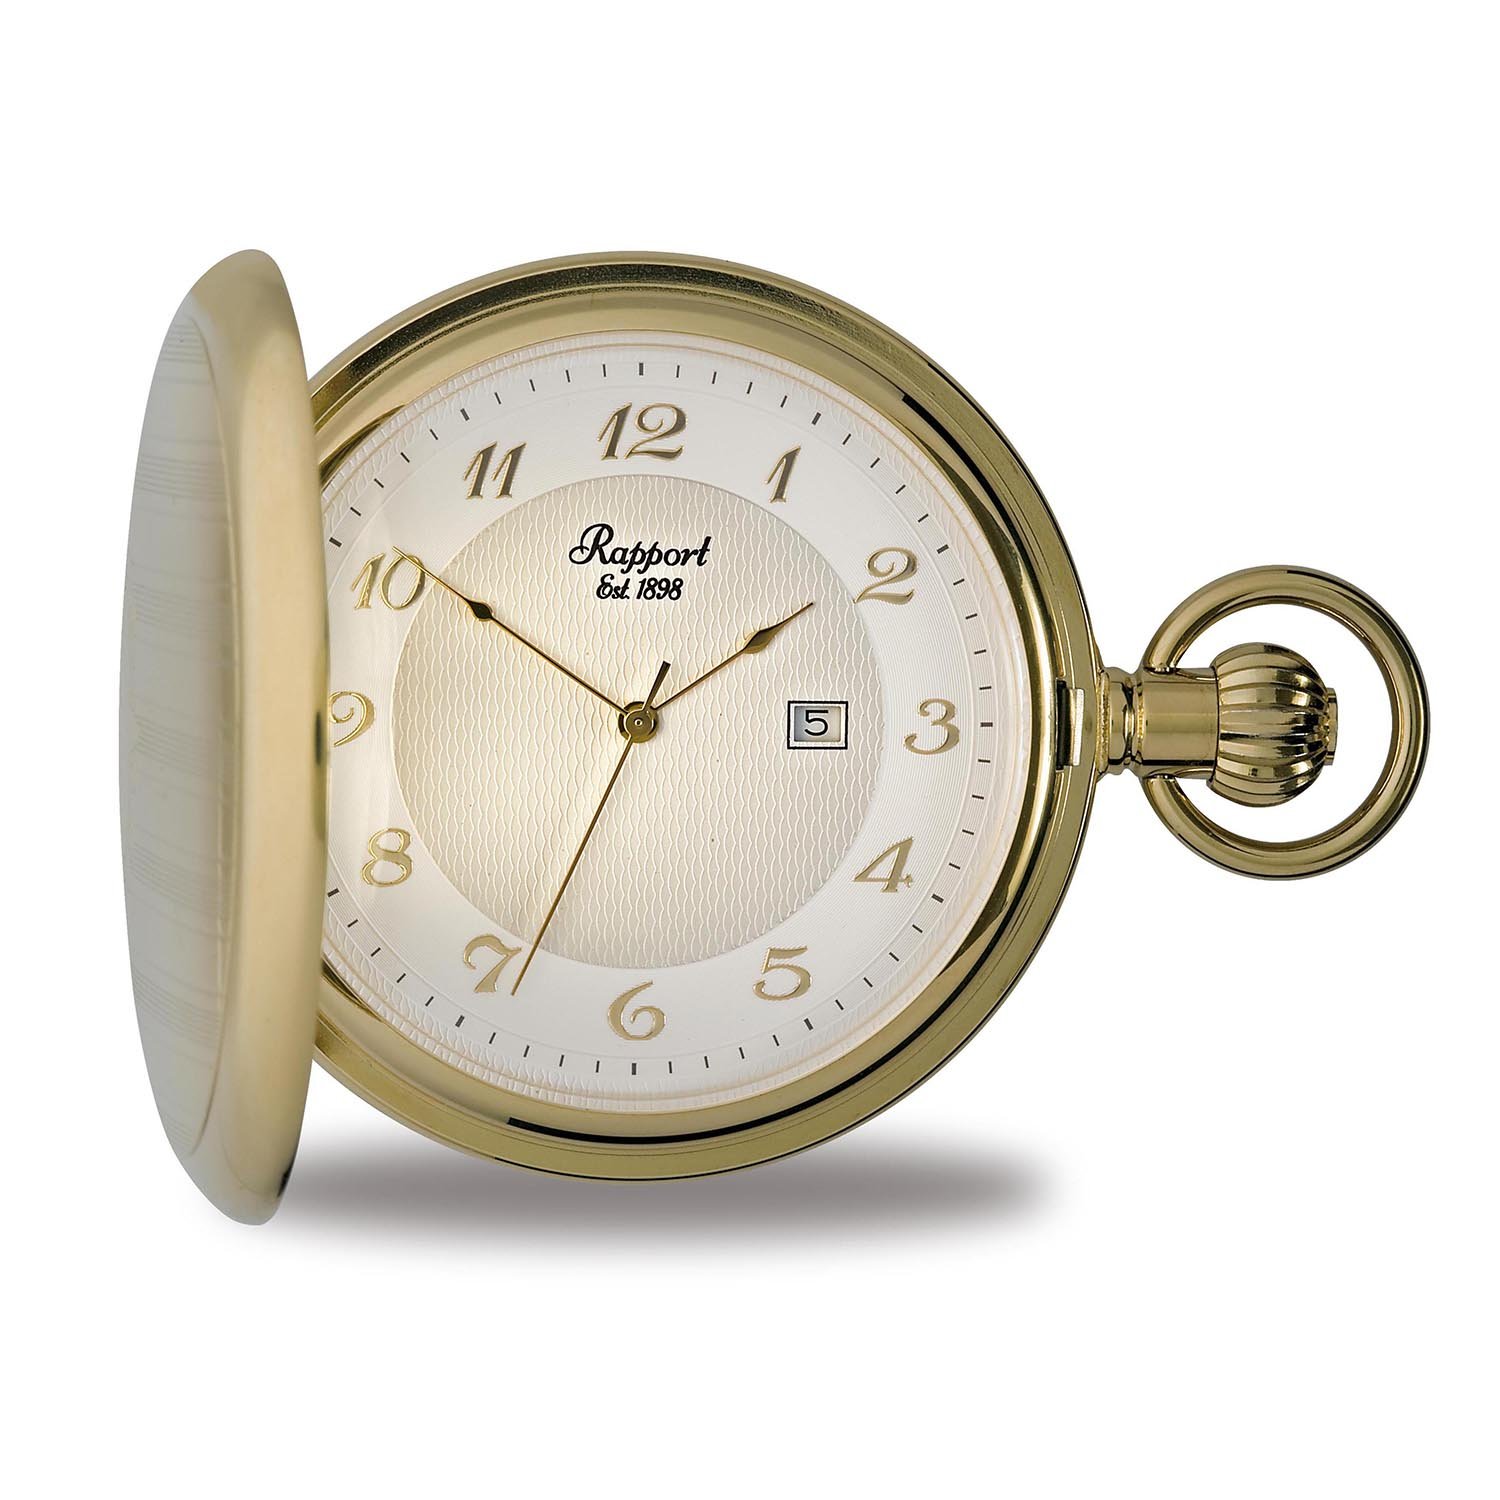 Rapport Vintage Pocket Watch with Chain Classic Oxford Hunter Case Pocket Watch with Date - Gold